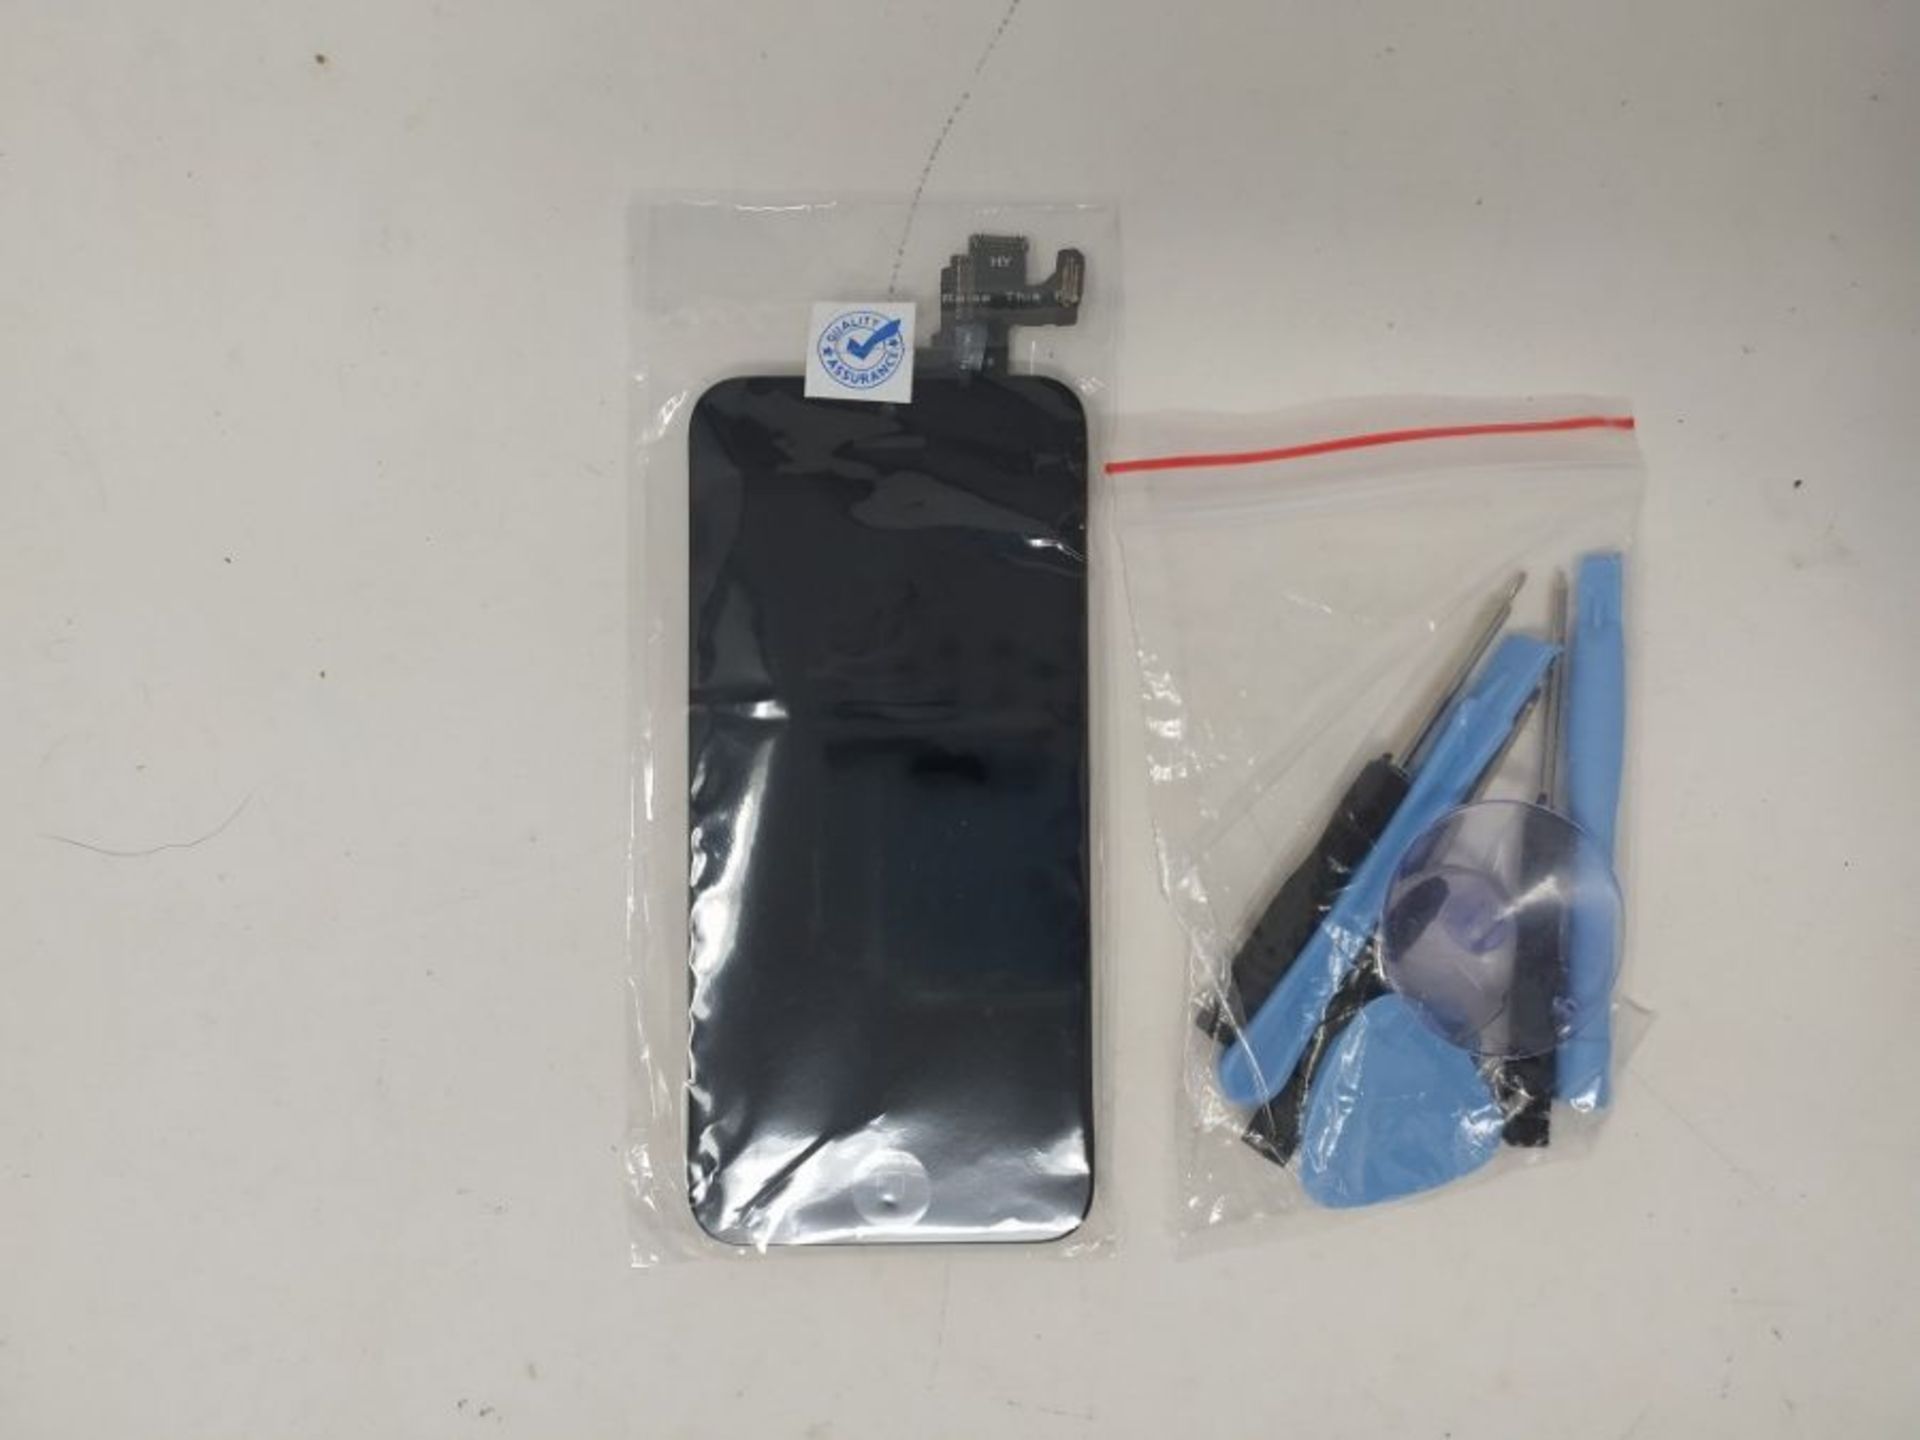 LL TRADER LCD for iPhone 5c Black Display Touch Screen Digitizer Full Assembly Replace - Image 3 of 3